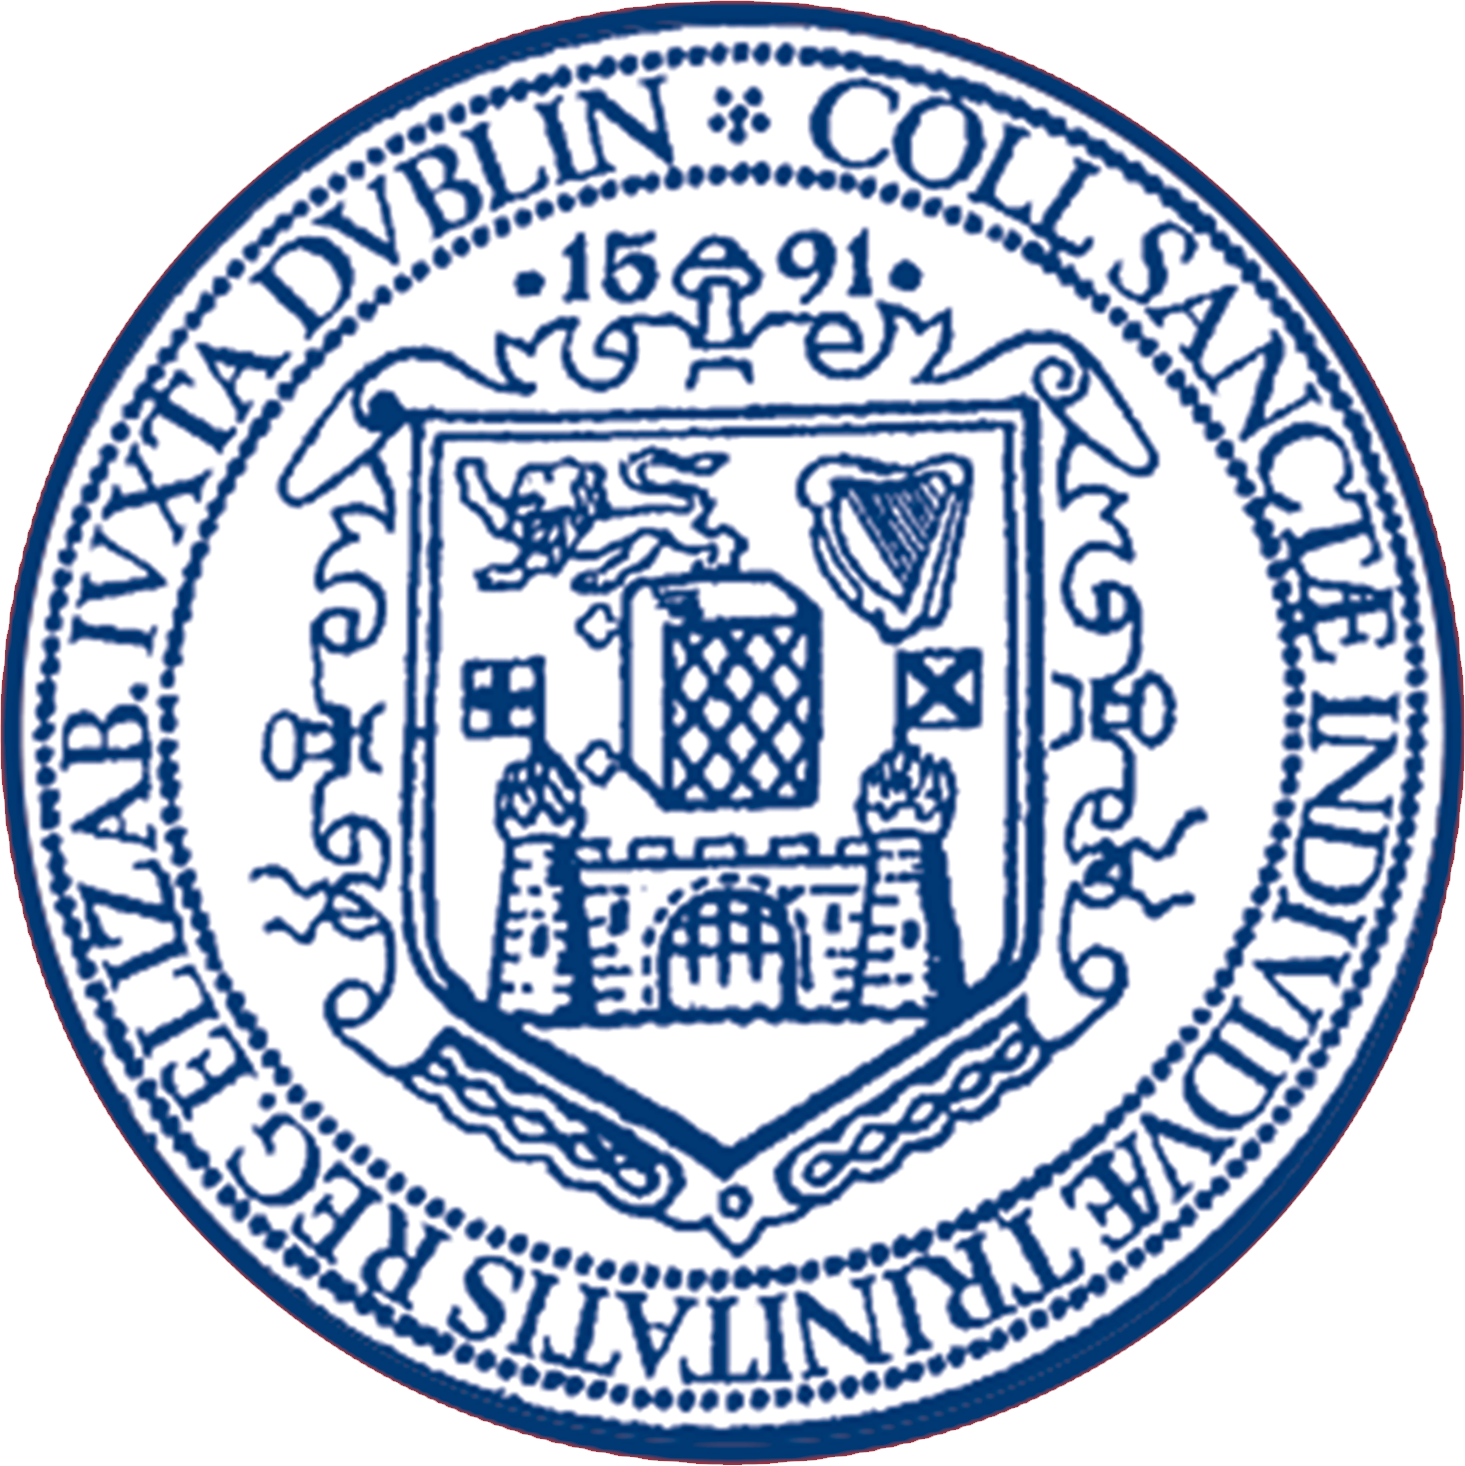 Trinity College Law Review - Crest